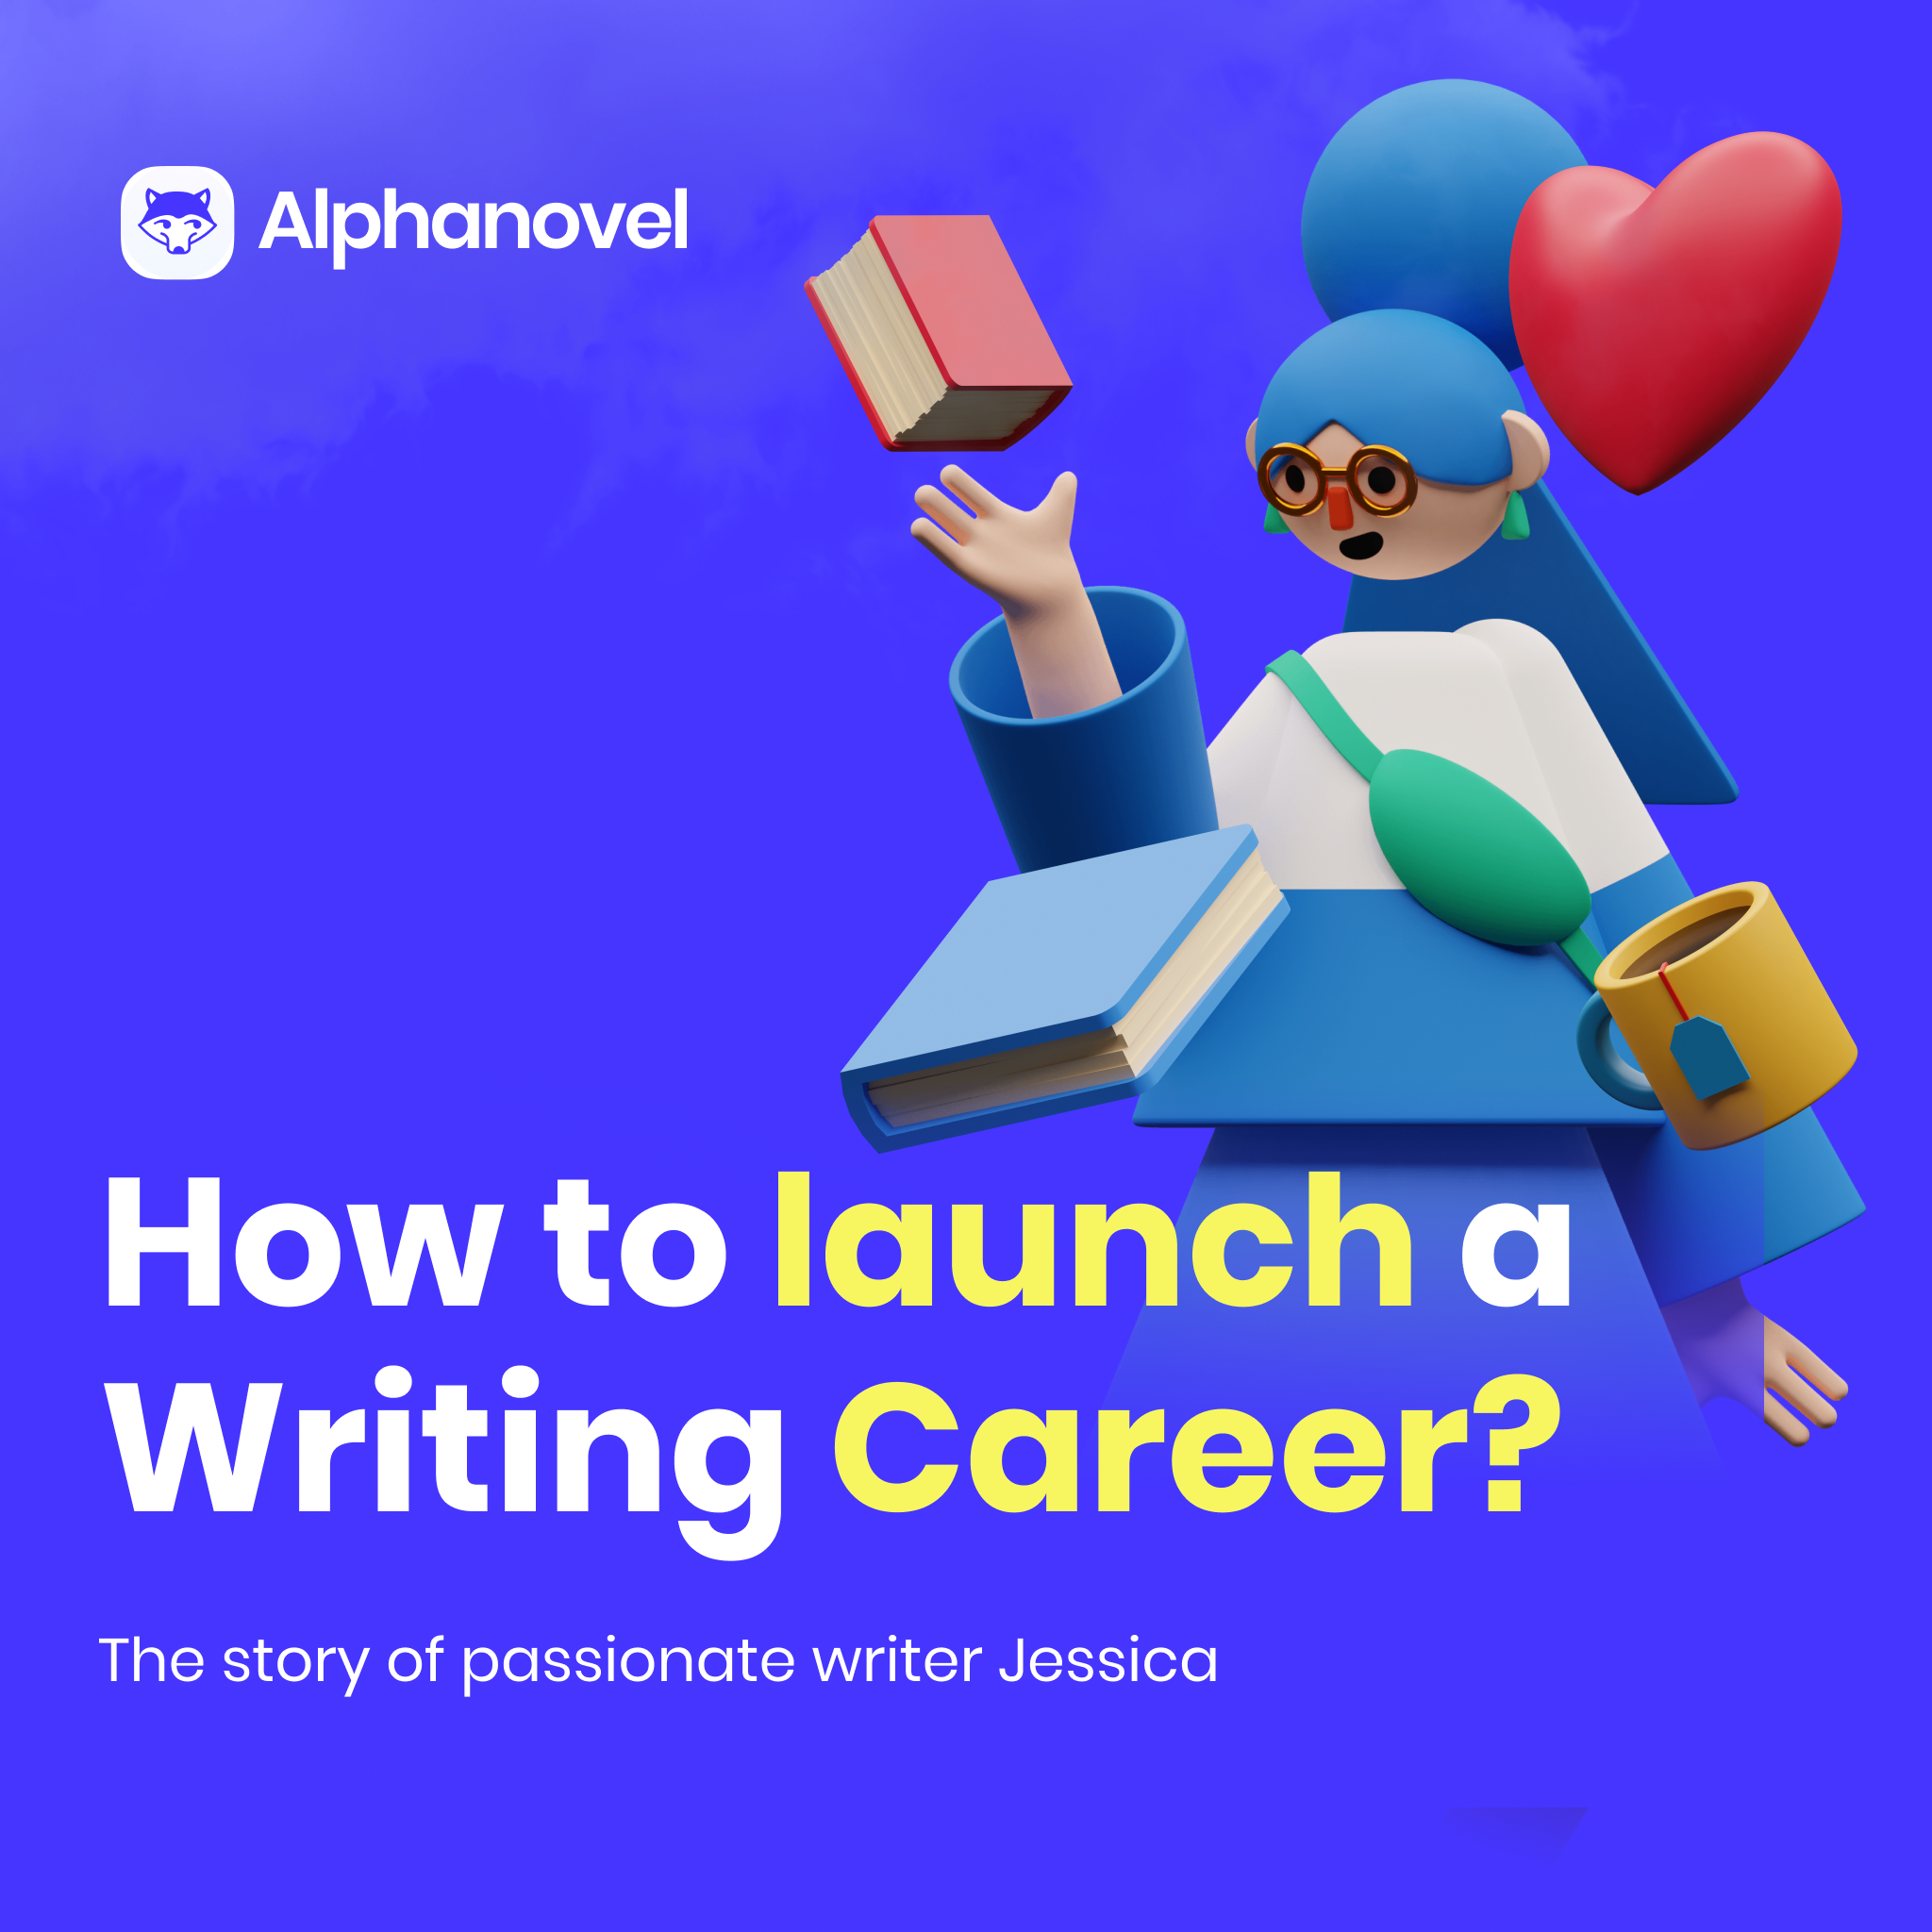 How to launch a Writing Career: Jessica’s story